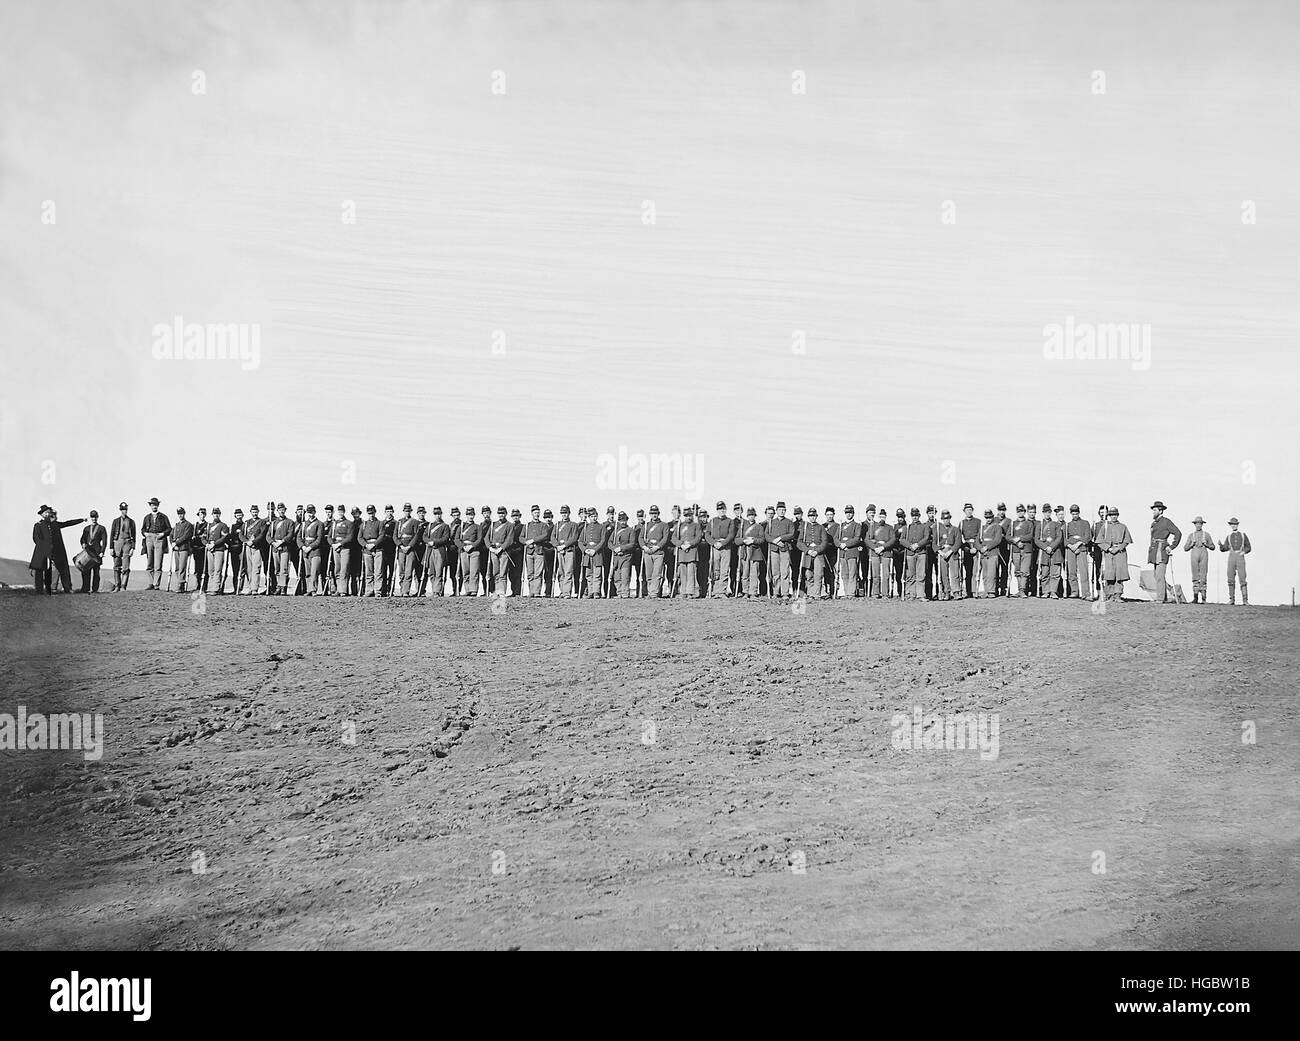 Infantry on parade during American Civil War. Stock Photo